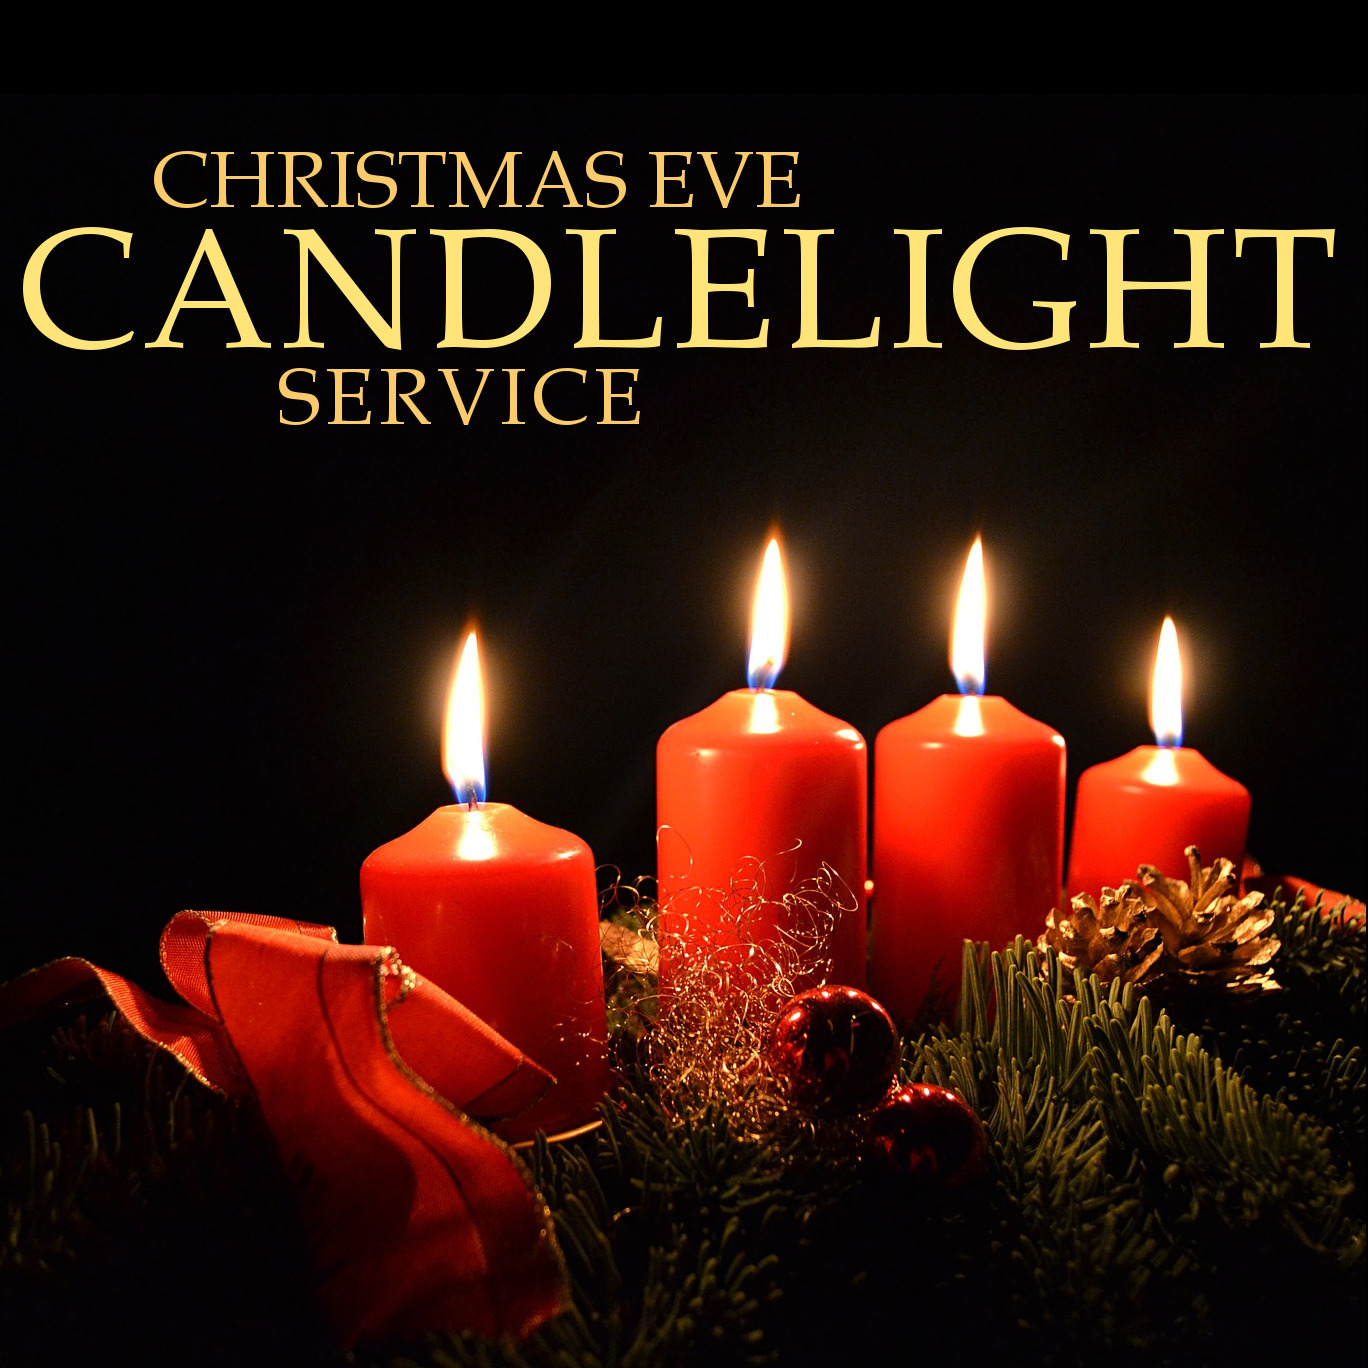 You are invited to outdoor candlelight Christmas Eve service at New